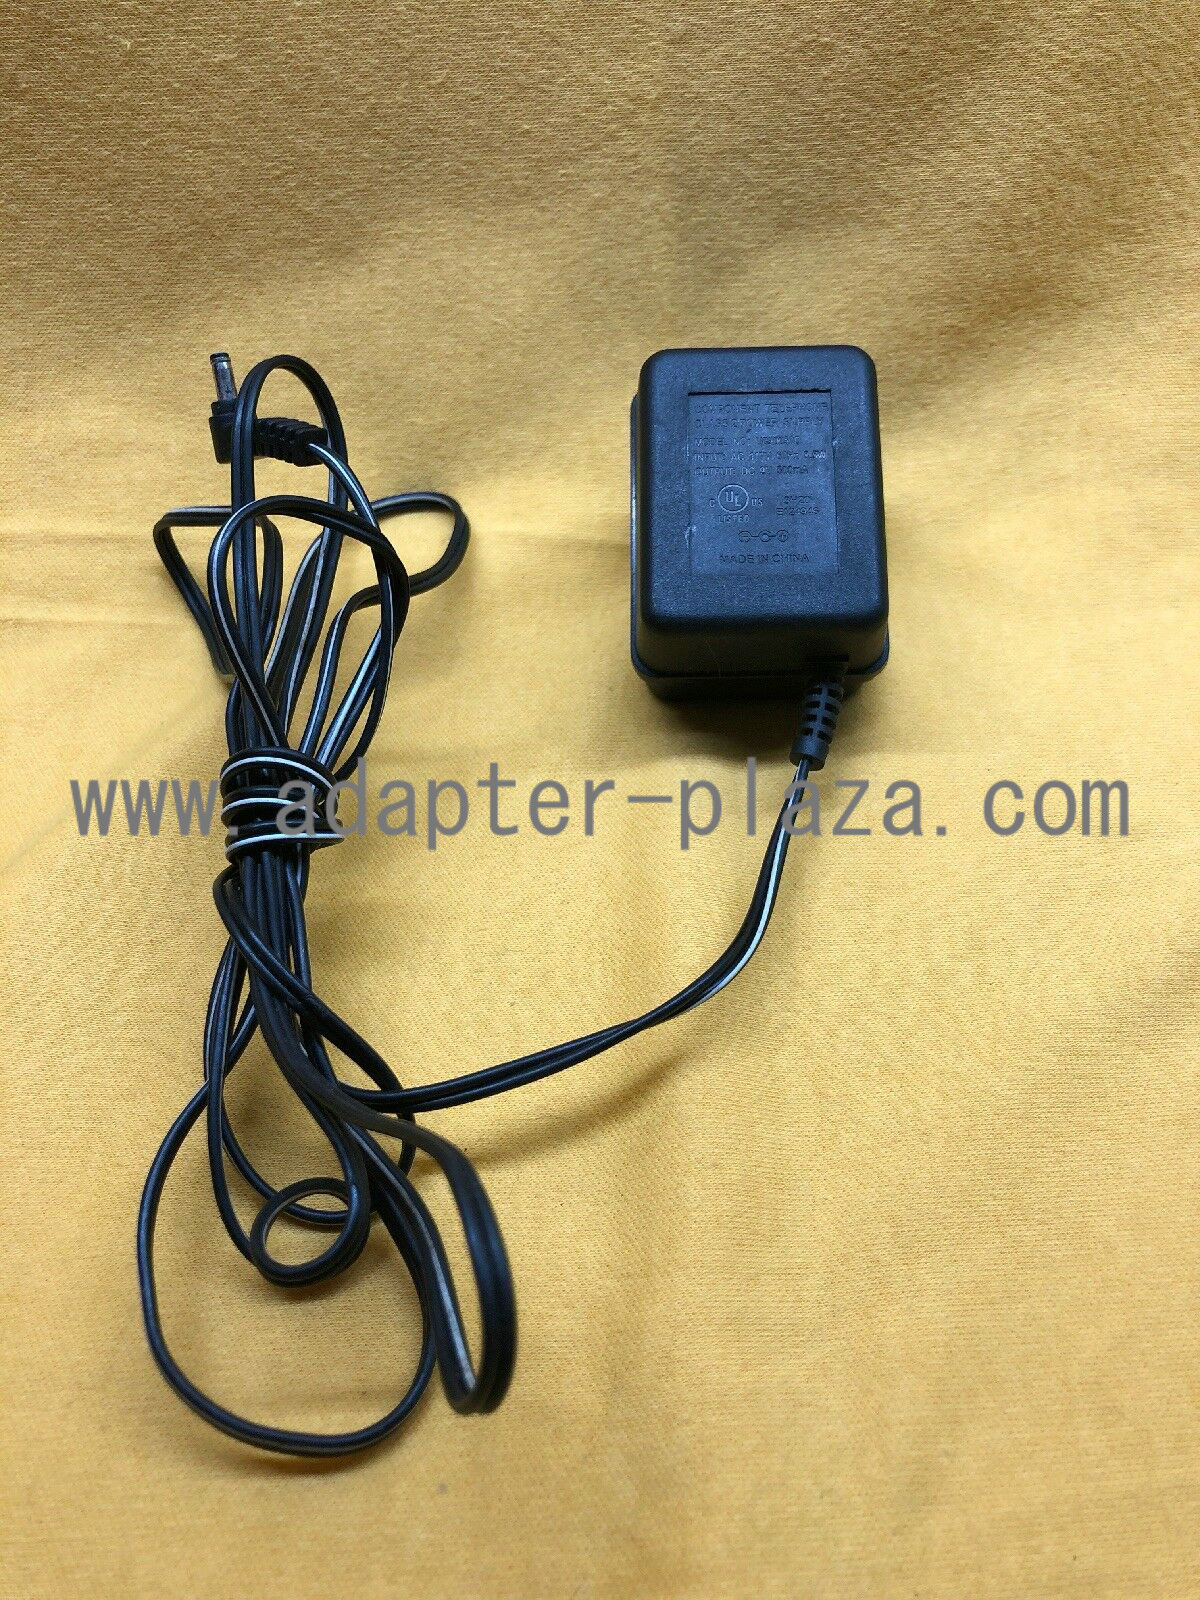 New Component Telephone U090050D 9V 500mA AC DC Class 2 Power Supply Adapter Charger